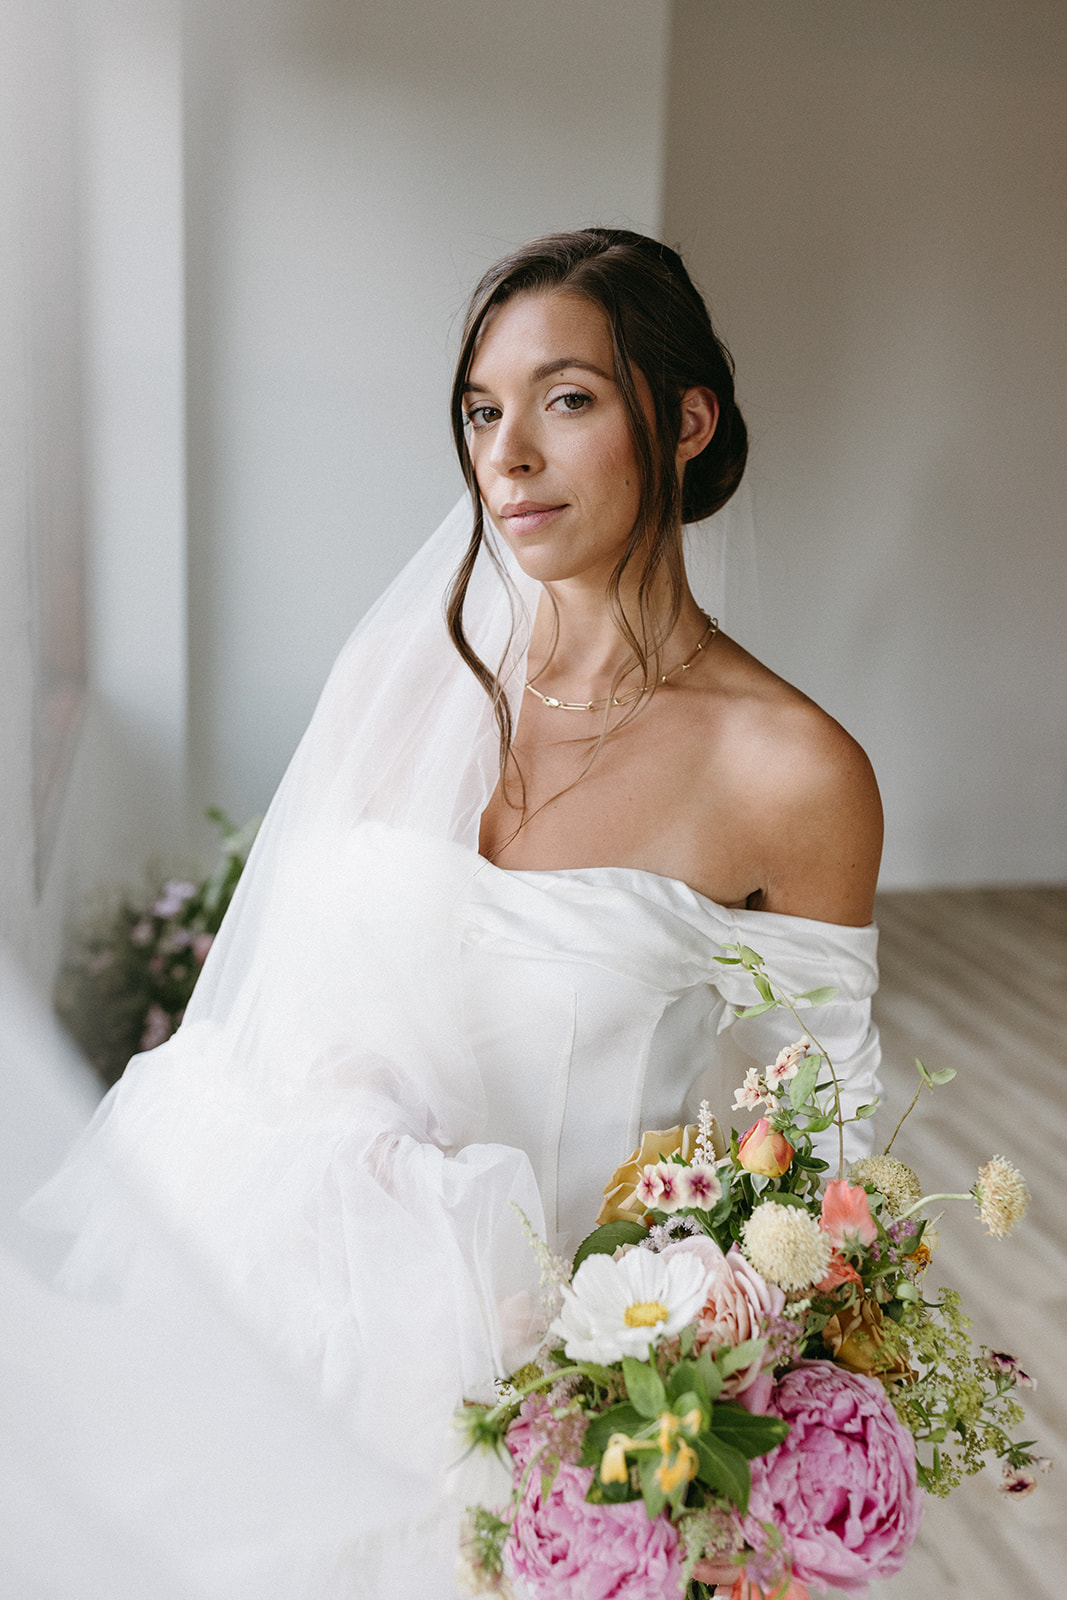 A elegant wedding portrait of a woman holding a bright bridal bouquet, wearing an off-the-shoulder wedding gown and veil